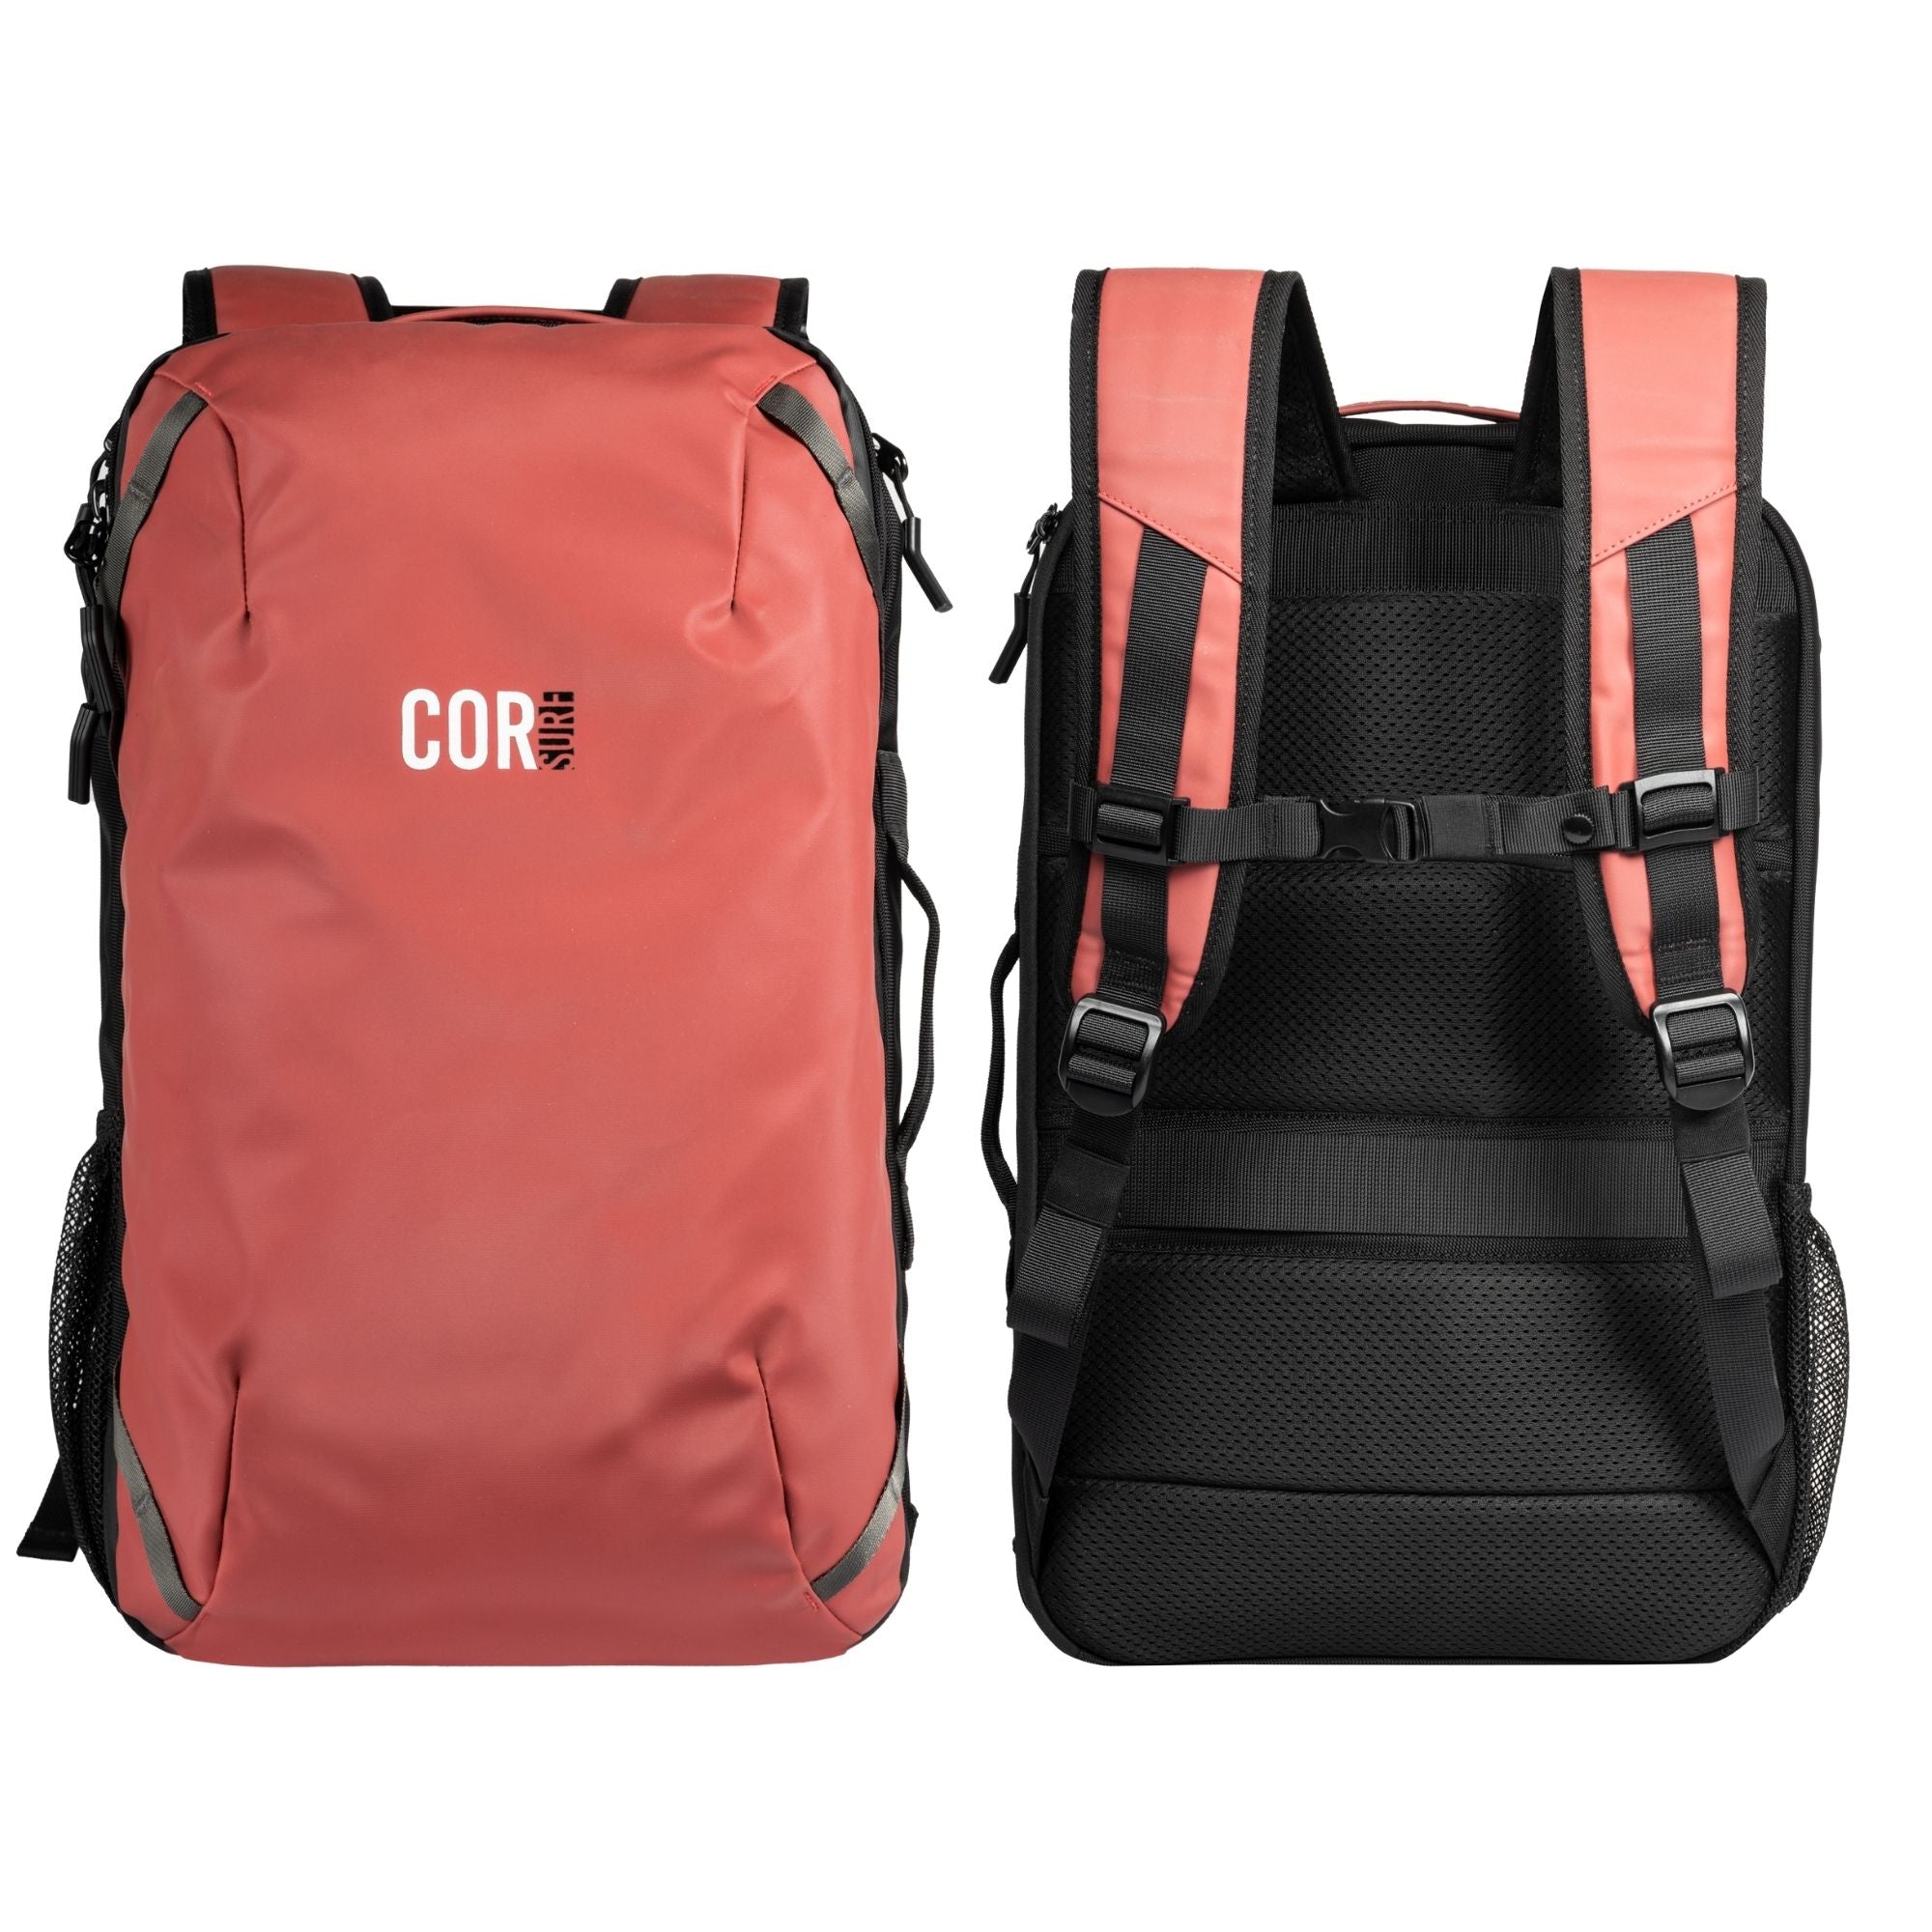 Cor Surf Travel Backpack - Flight Approved Carry on Laptop Backpack with Secret Passport Pockets | The Island Hopper (28L, Lava Red)